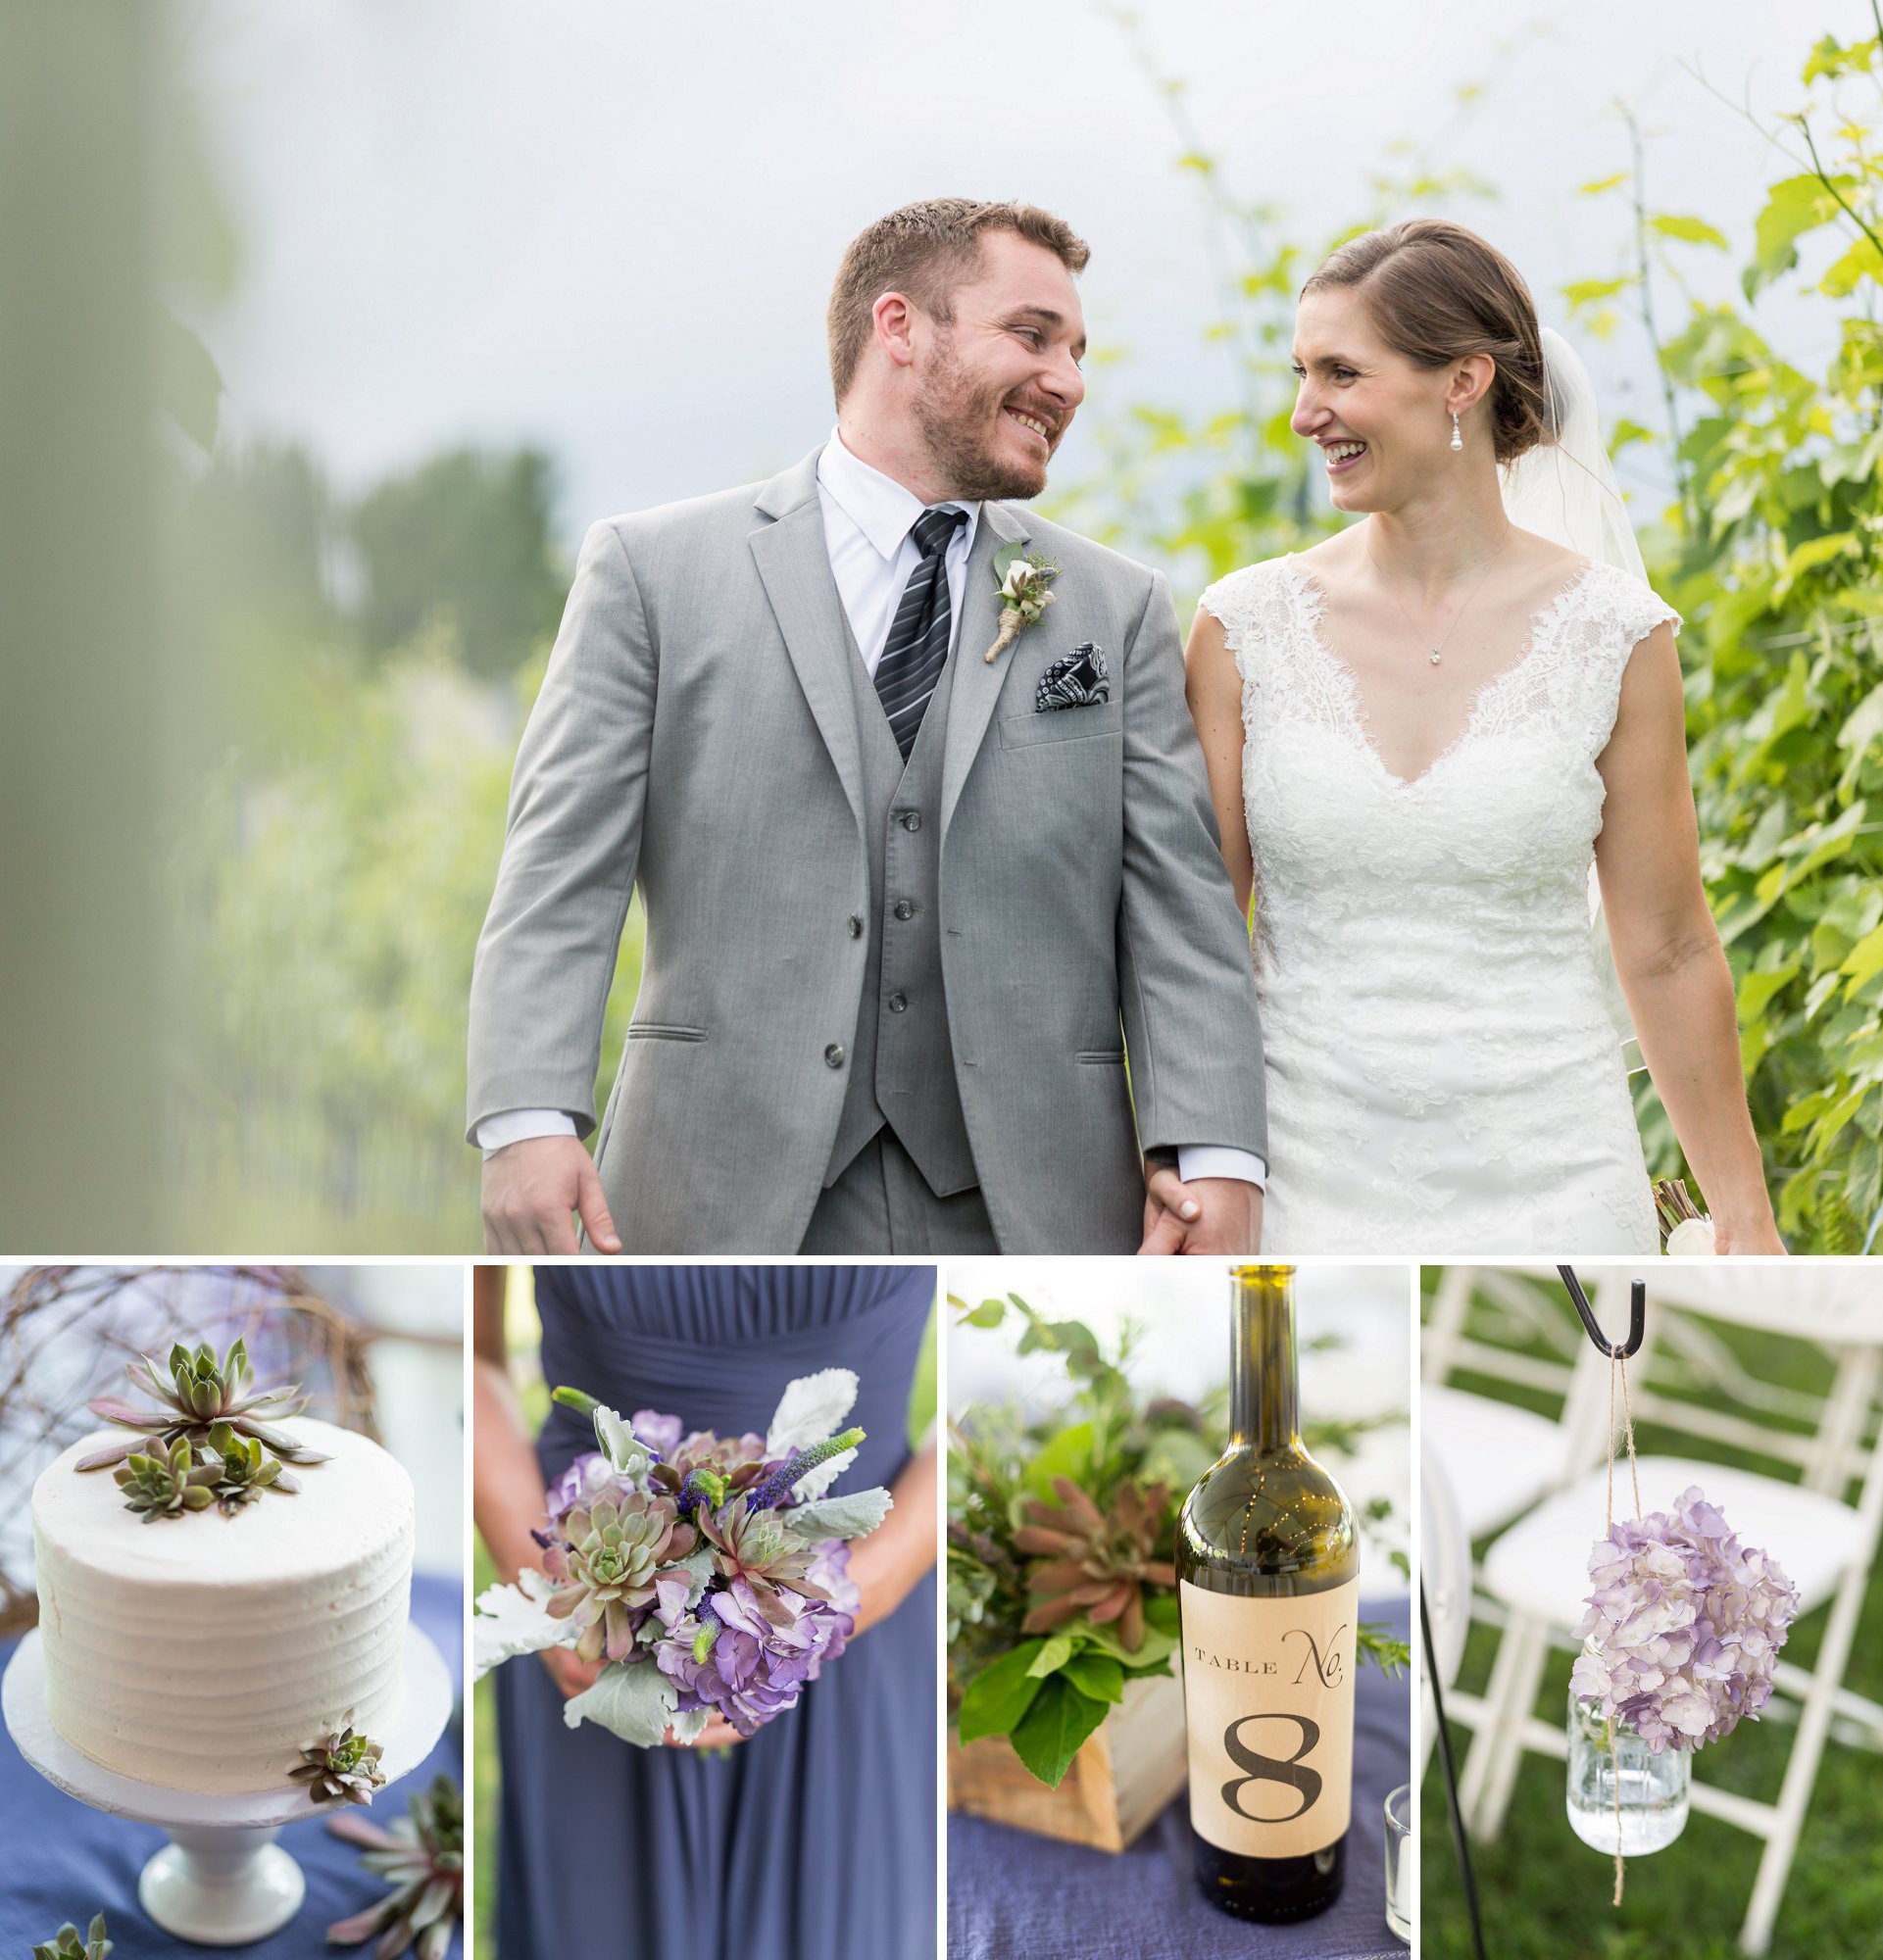 Wedding at Flag Hill Winery in Lee, NH in July 2017